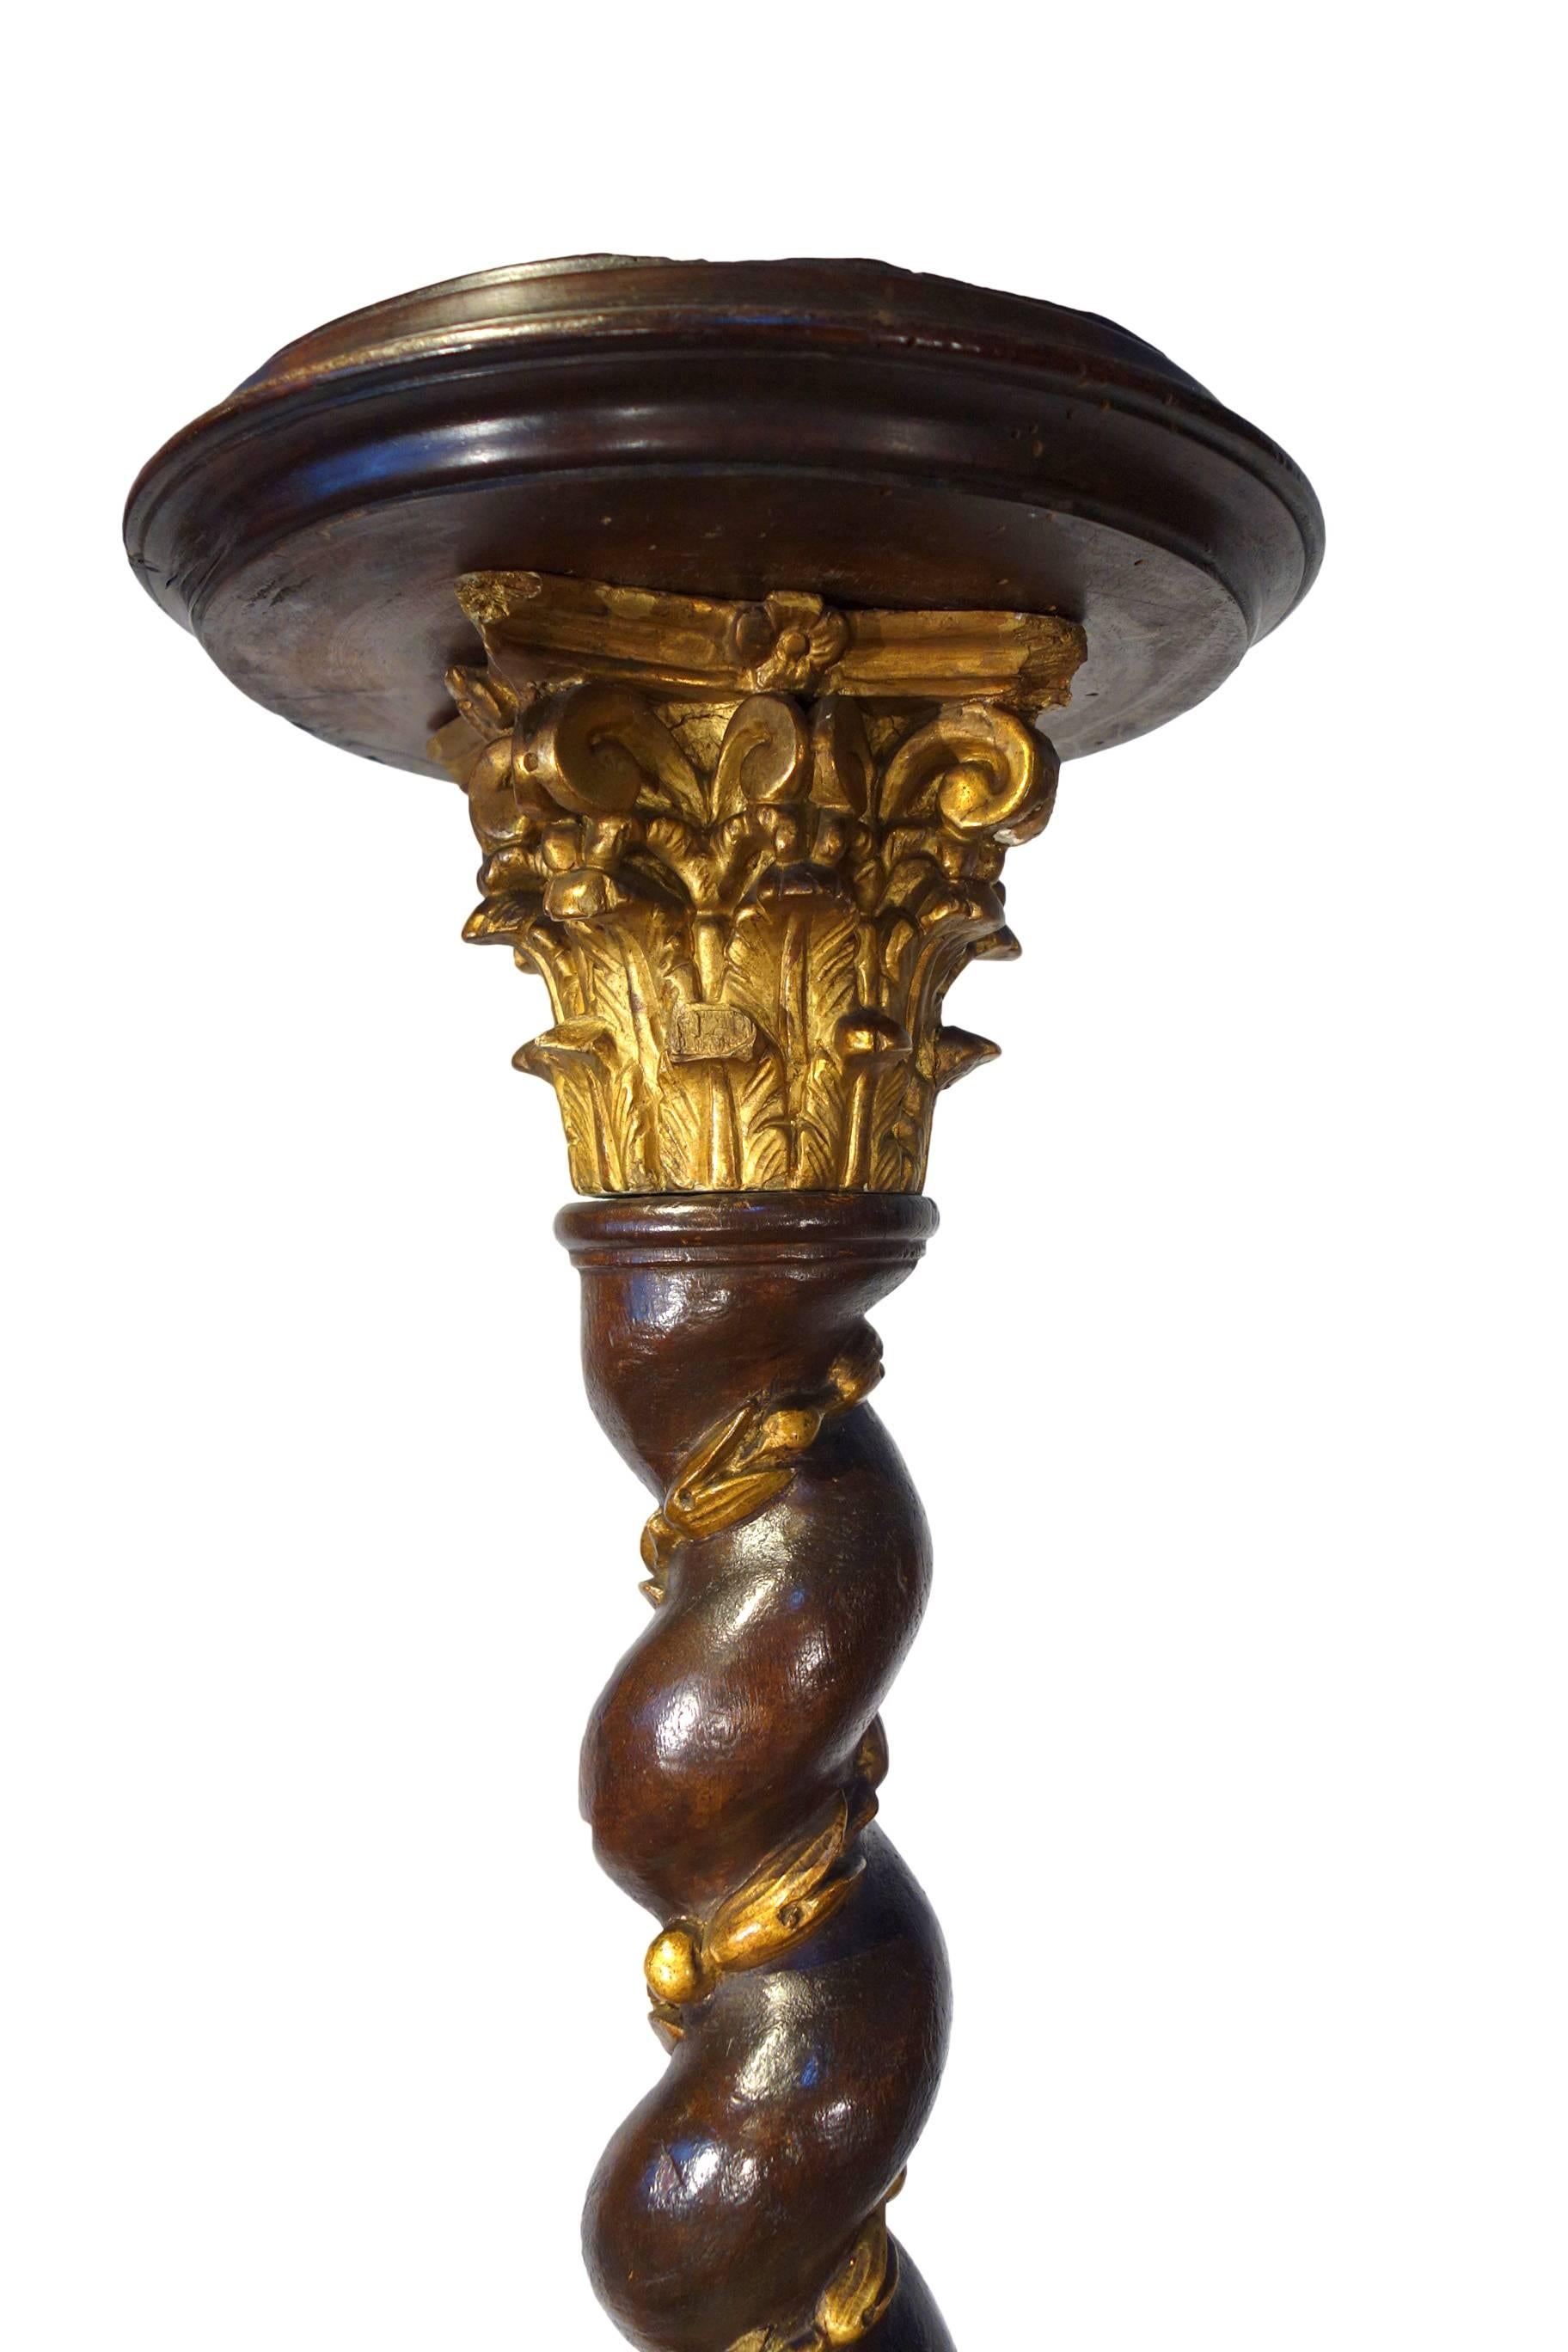 Spectacular, ornately carved walnut candle torchiere pair with gilt details, exquisite Corinthian capitals, spiral columns with acanthus leaves and berries, supported by architectural, triangular bases. Romantic period, circa 1820.

Dimensions: